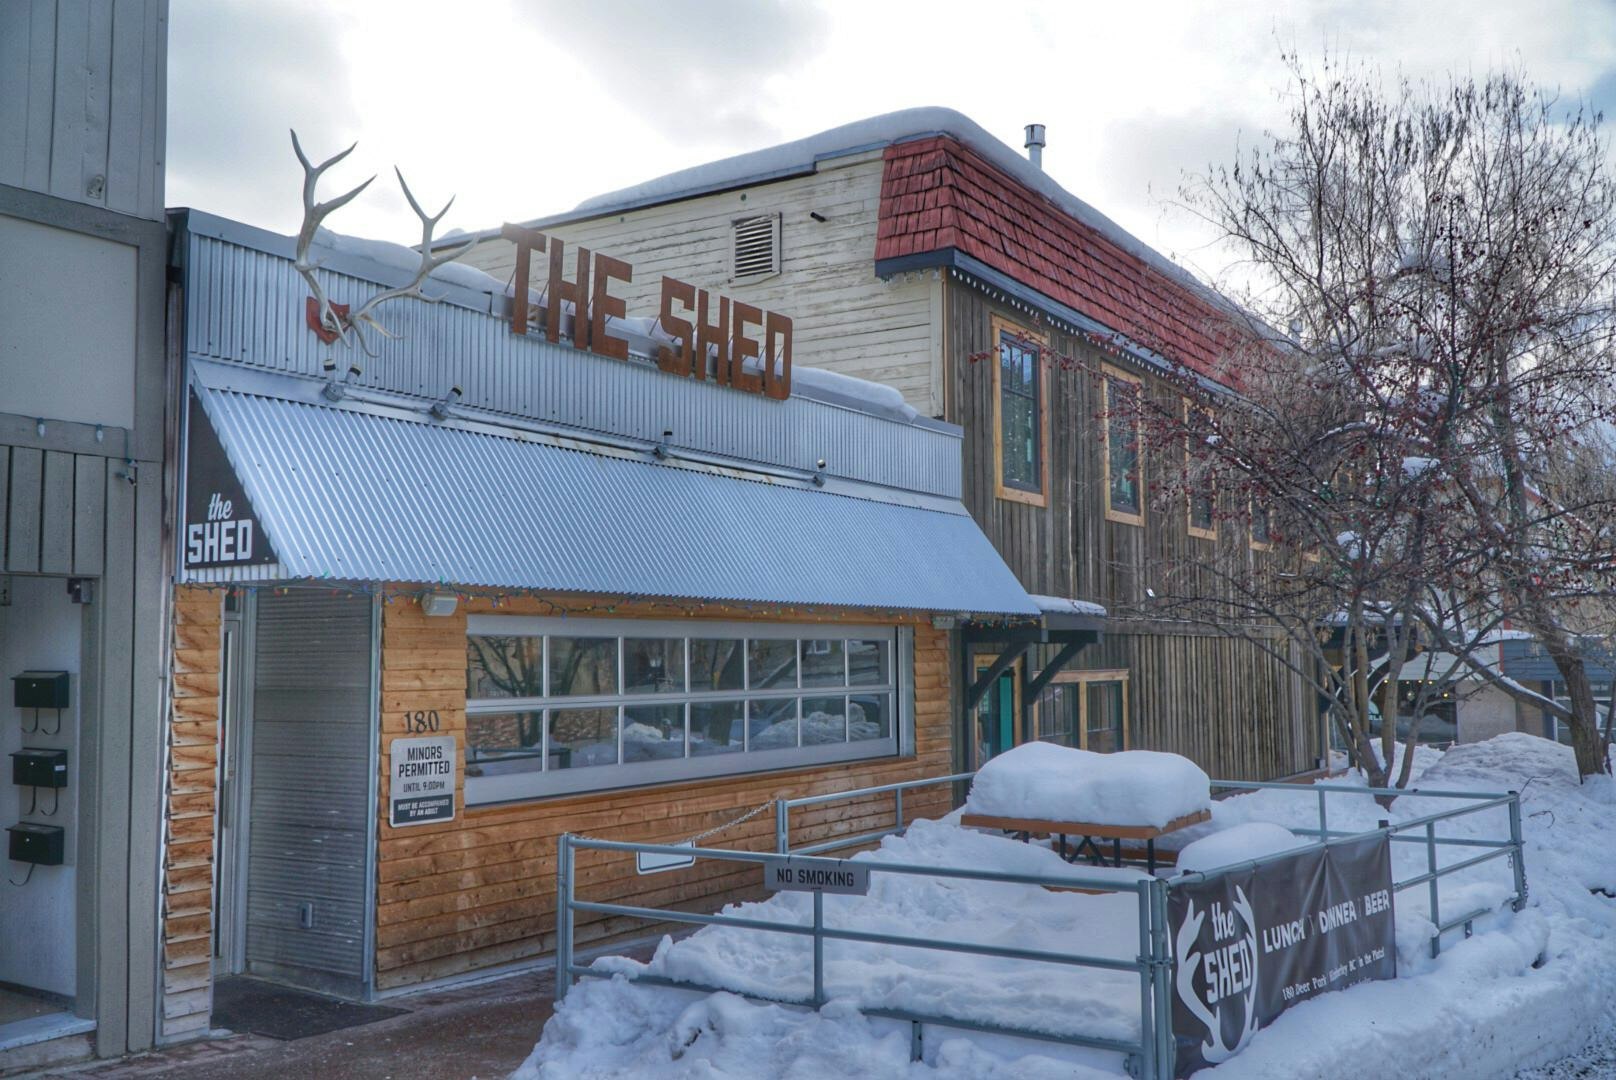 The exterior of a bar/restaurant, ; it has horizonal wood cladding and a corrugated metal awning decorated with a set of antlers and The Shed in red, cut-out letters. A few tables in an outdoor seating area are laden with several feet of snow.